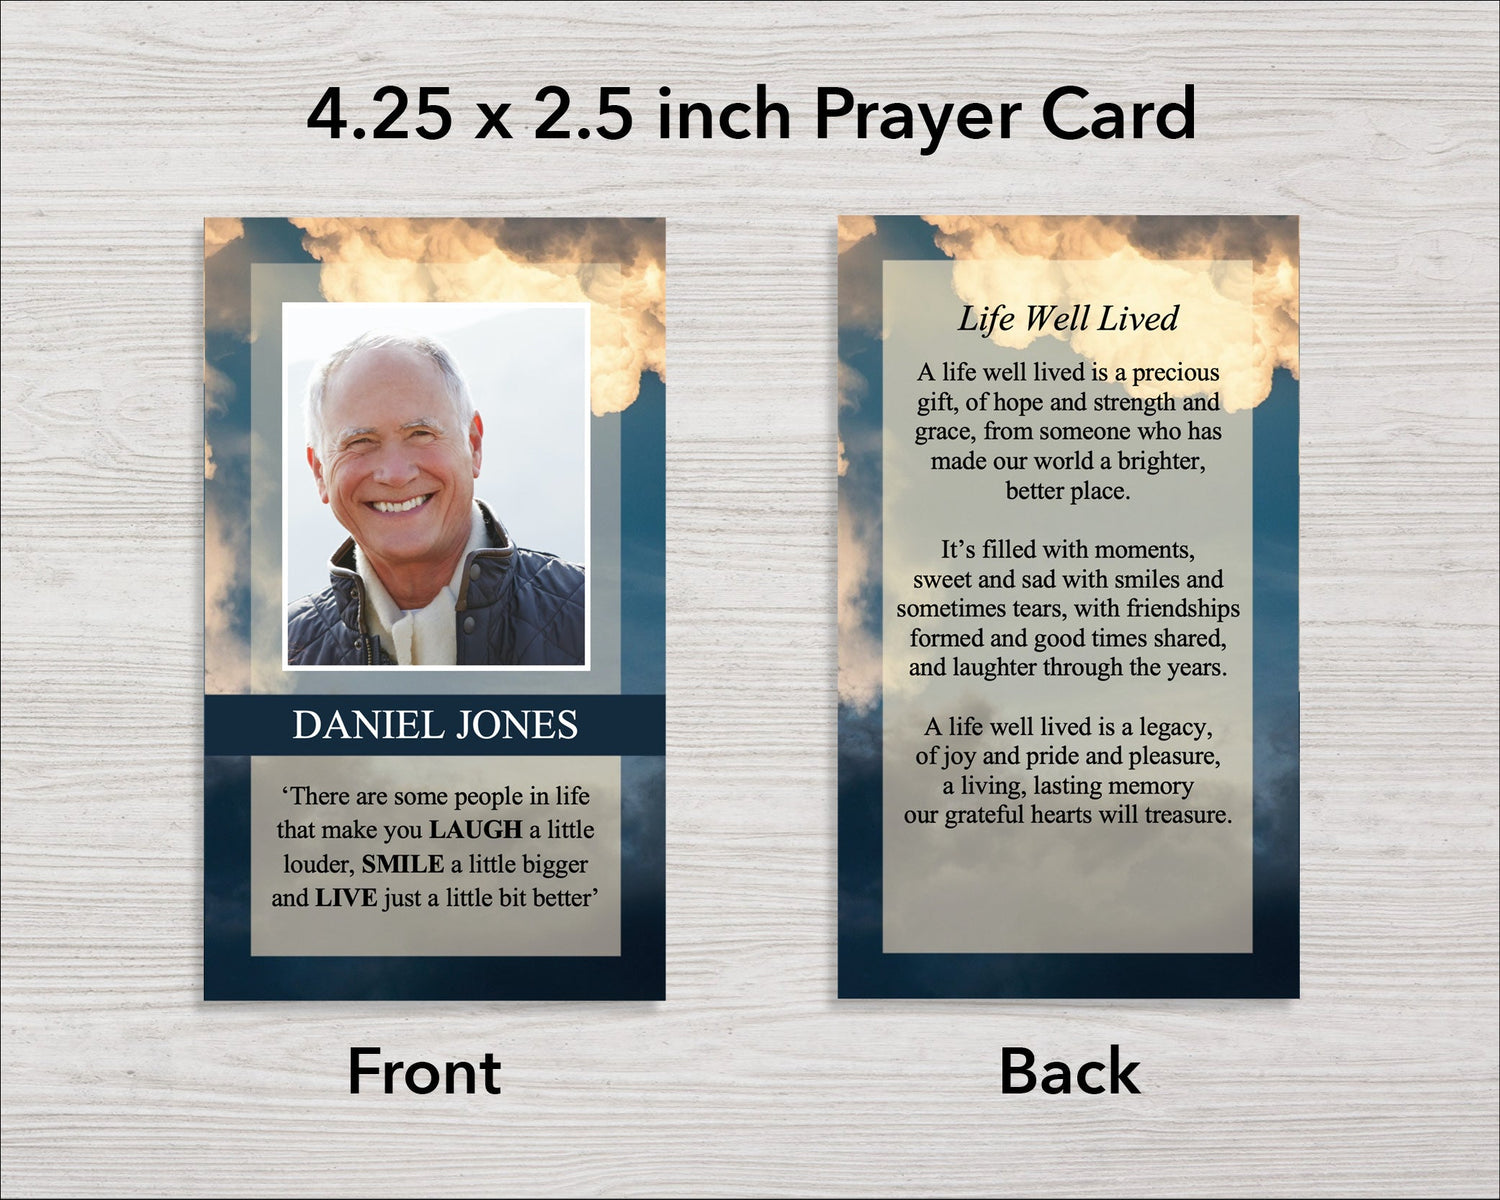 Sky Funeral Prayer Card (4.25 x 2.5 inches)